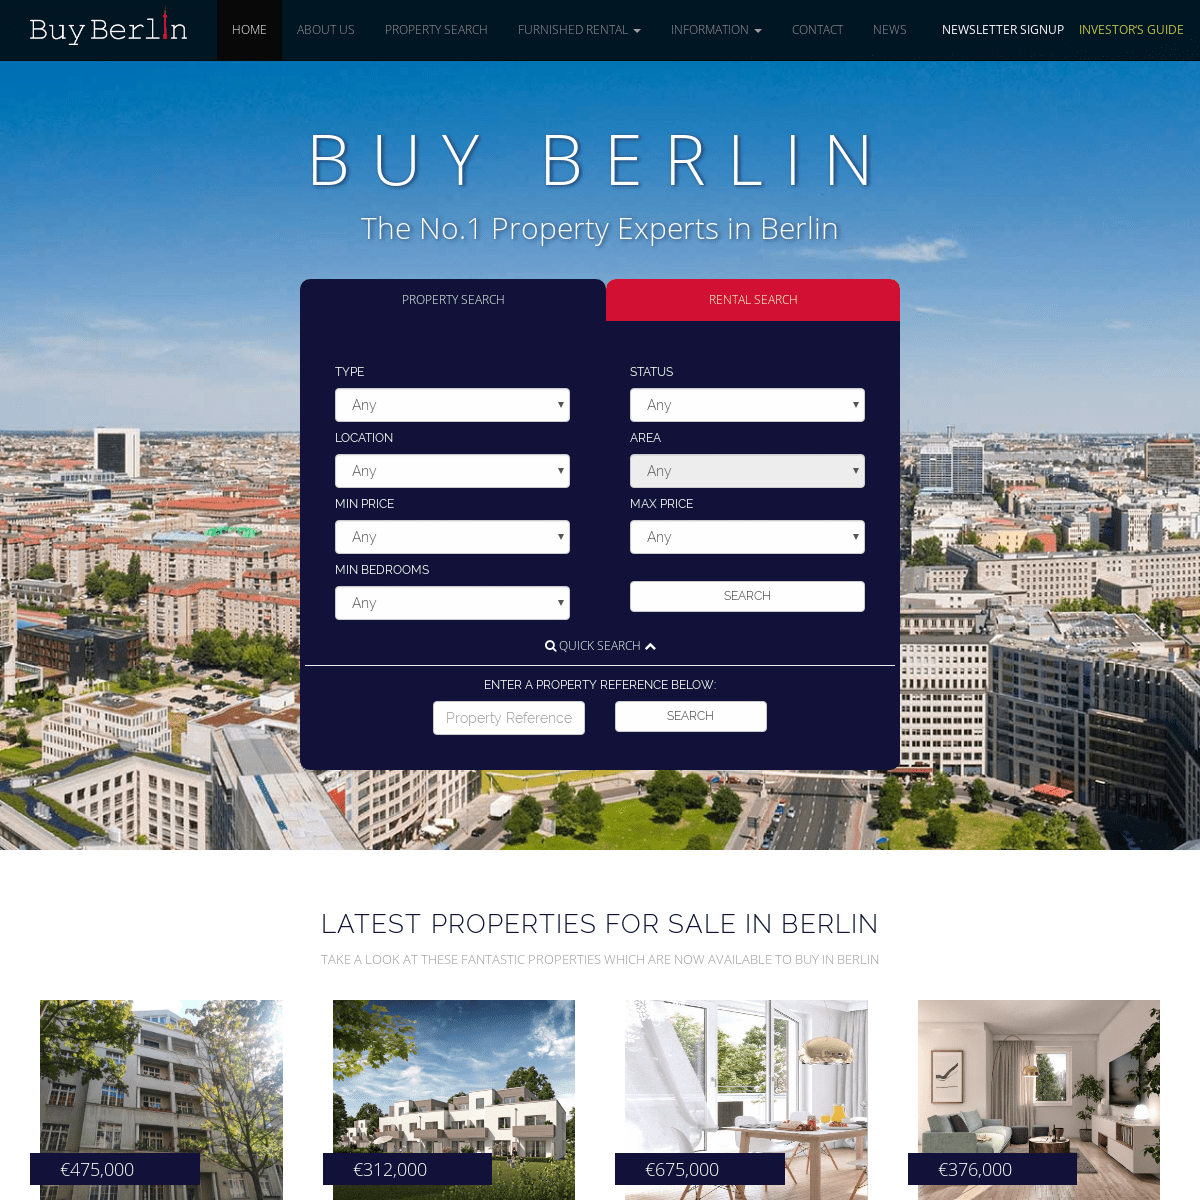 A complete backup of buyberlin.co.uk